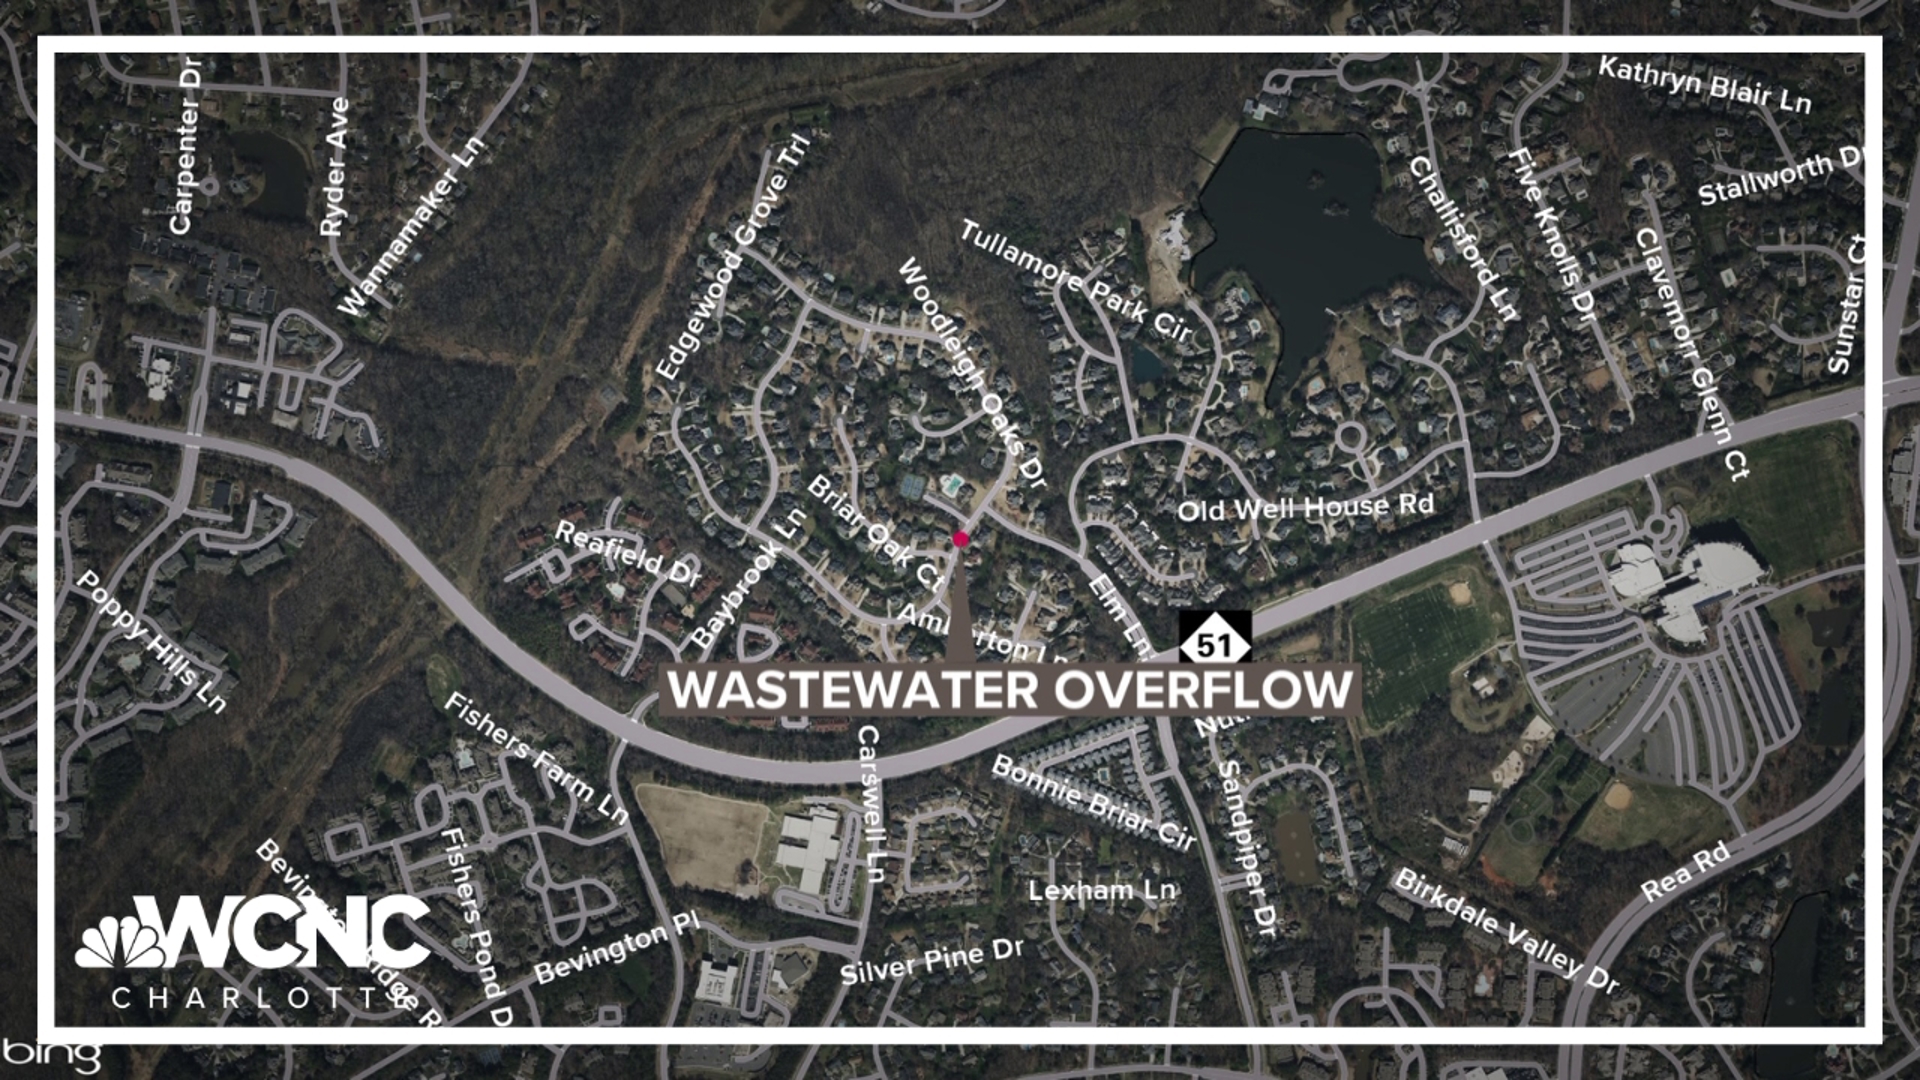 A grease blockage is to blame for more than 1,000 pounds of wastewater to spill into McAlpine Creek Sunday.